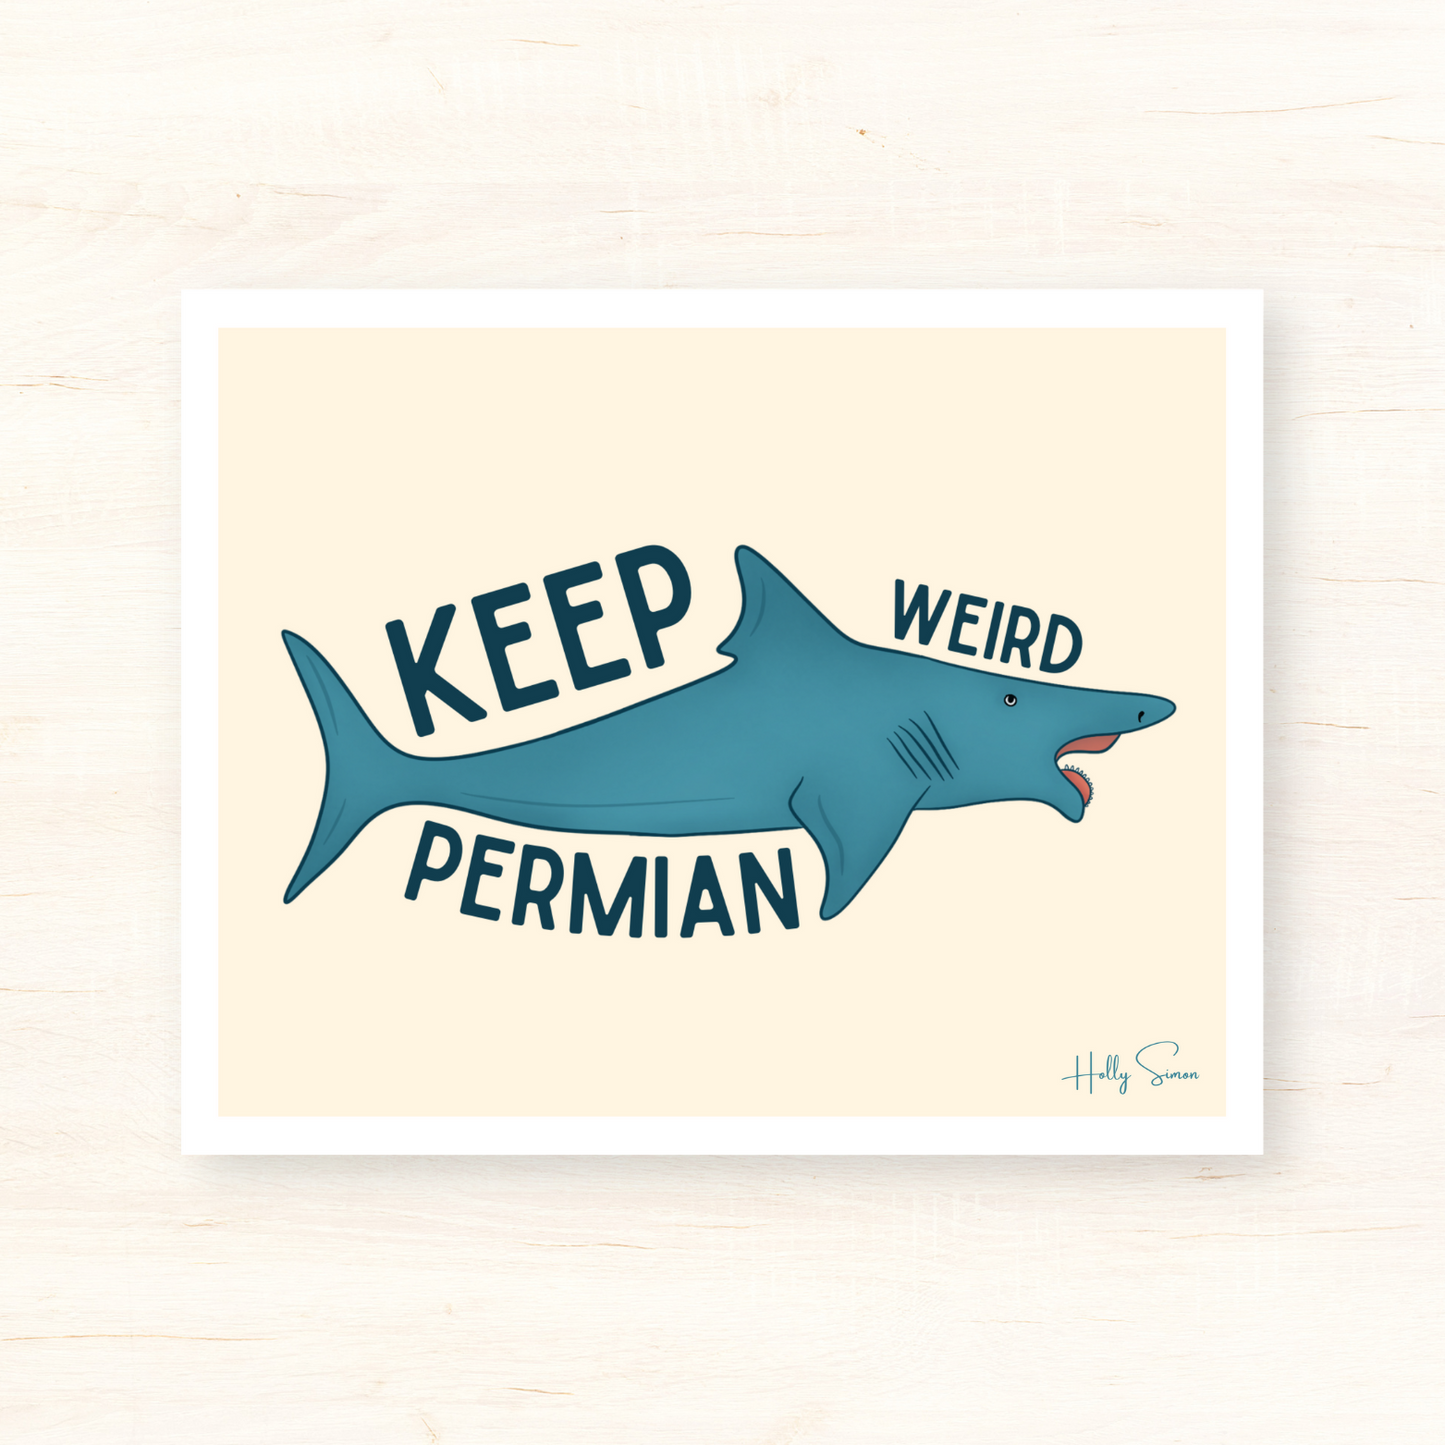 Keep Permian Weird Helicoprion Print 10"x8"